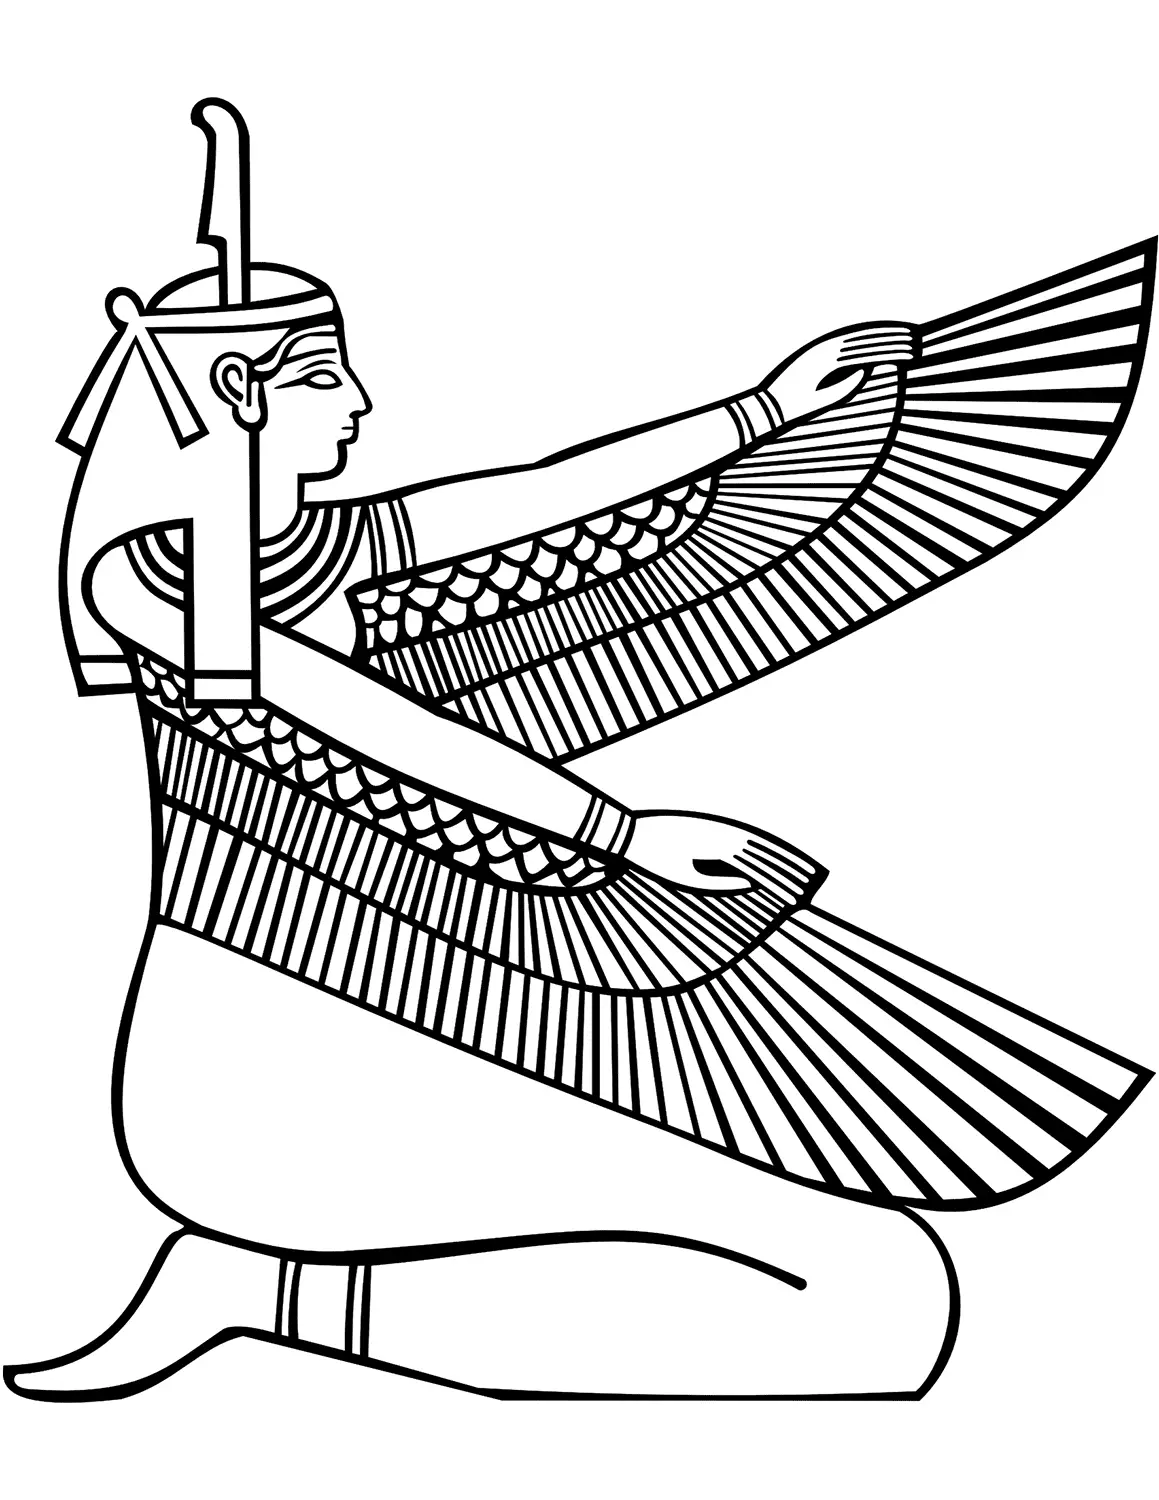 GODDESS MAAT TRUTH OF JUSTICE Free Clipart Coloring Pages for Kids Adults Art Activities Line Art